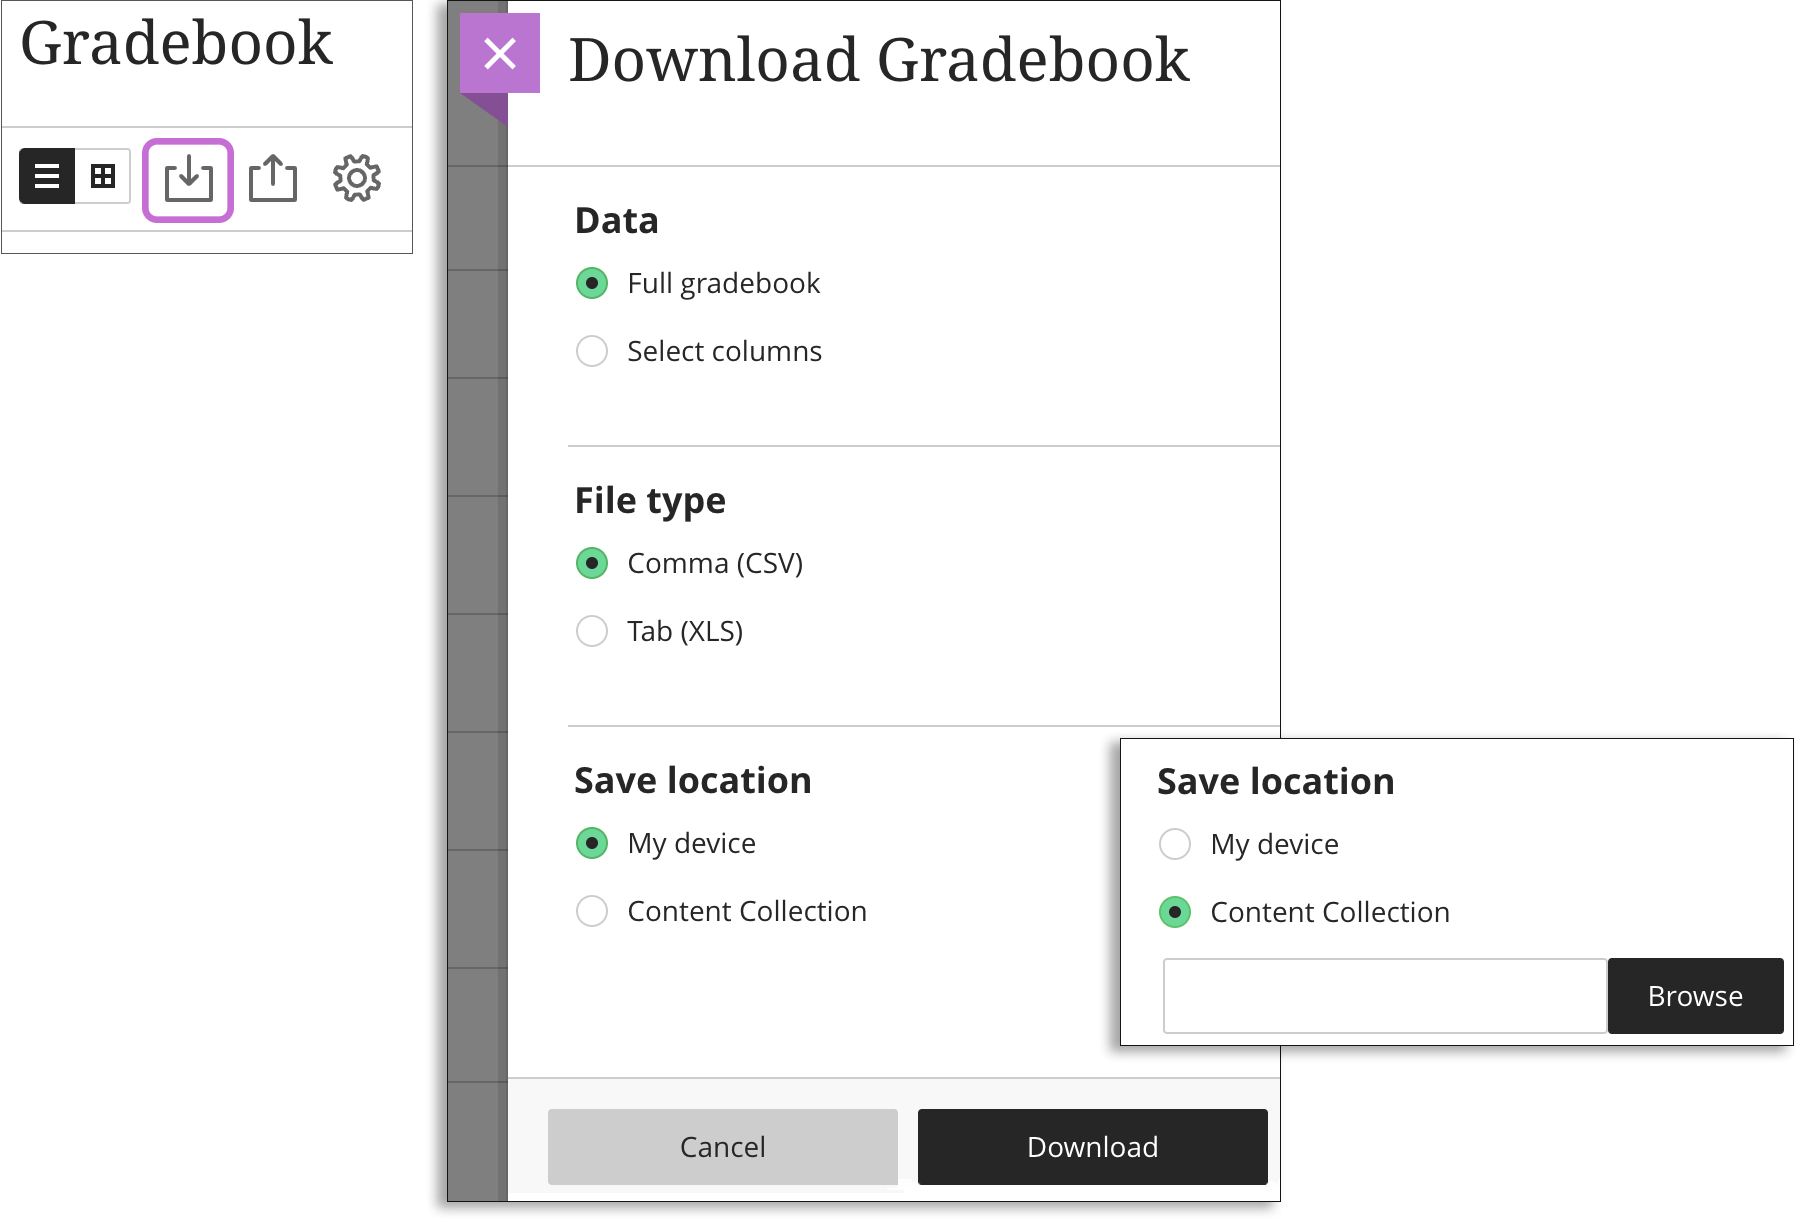 Select the gradebook download icon. The Download details page opens on the right